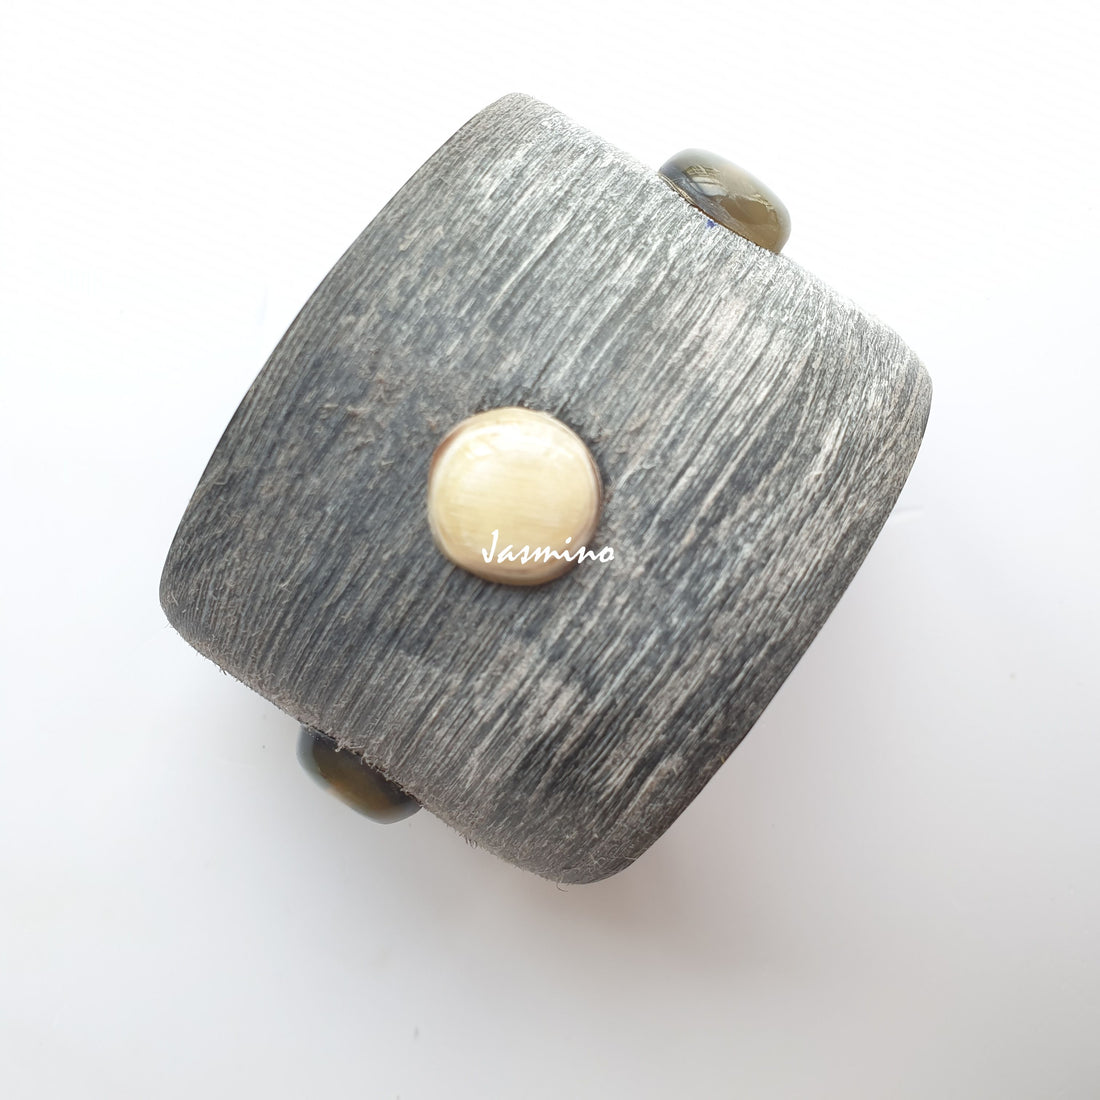 unique handmade Vintage grey cuff bracelet features three small white round in a center, made of natural buffalo horn